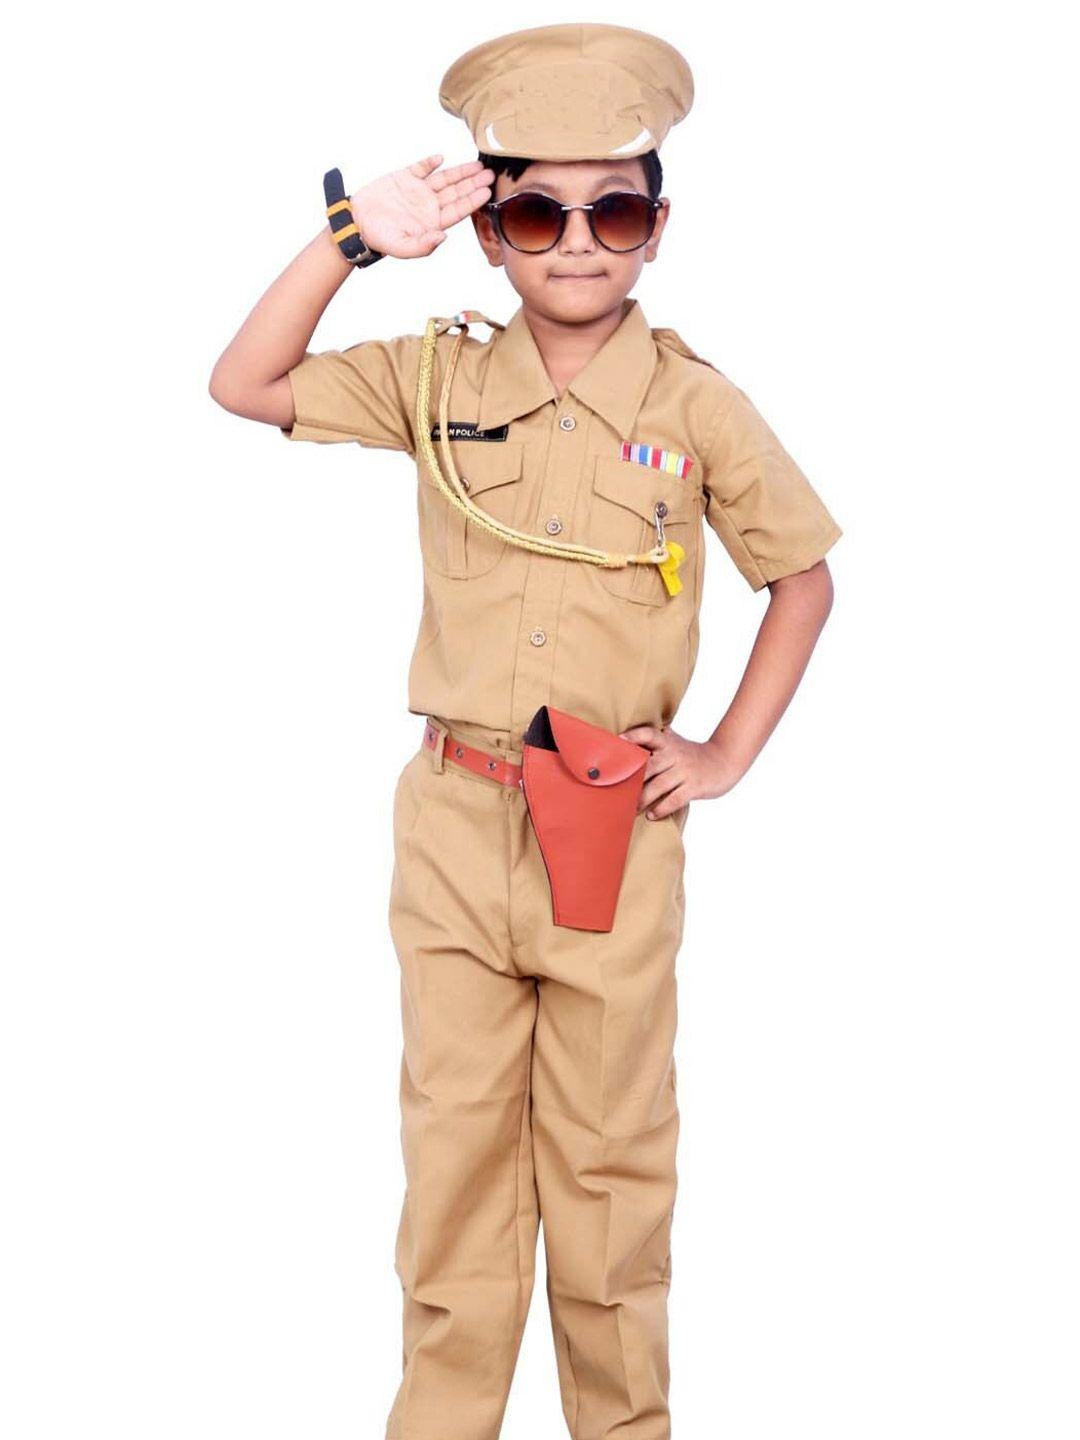 baesd-kids-shirt-with-trousers-police-costume-clothing-set